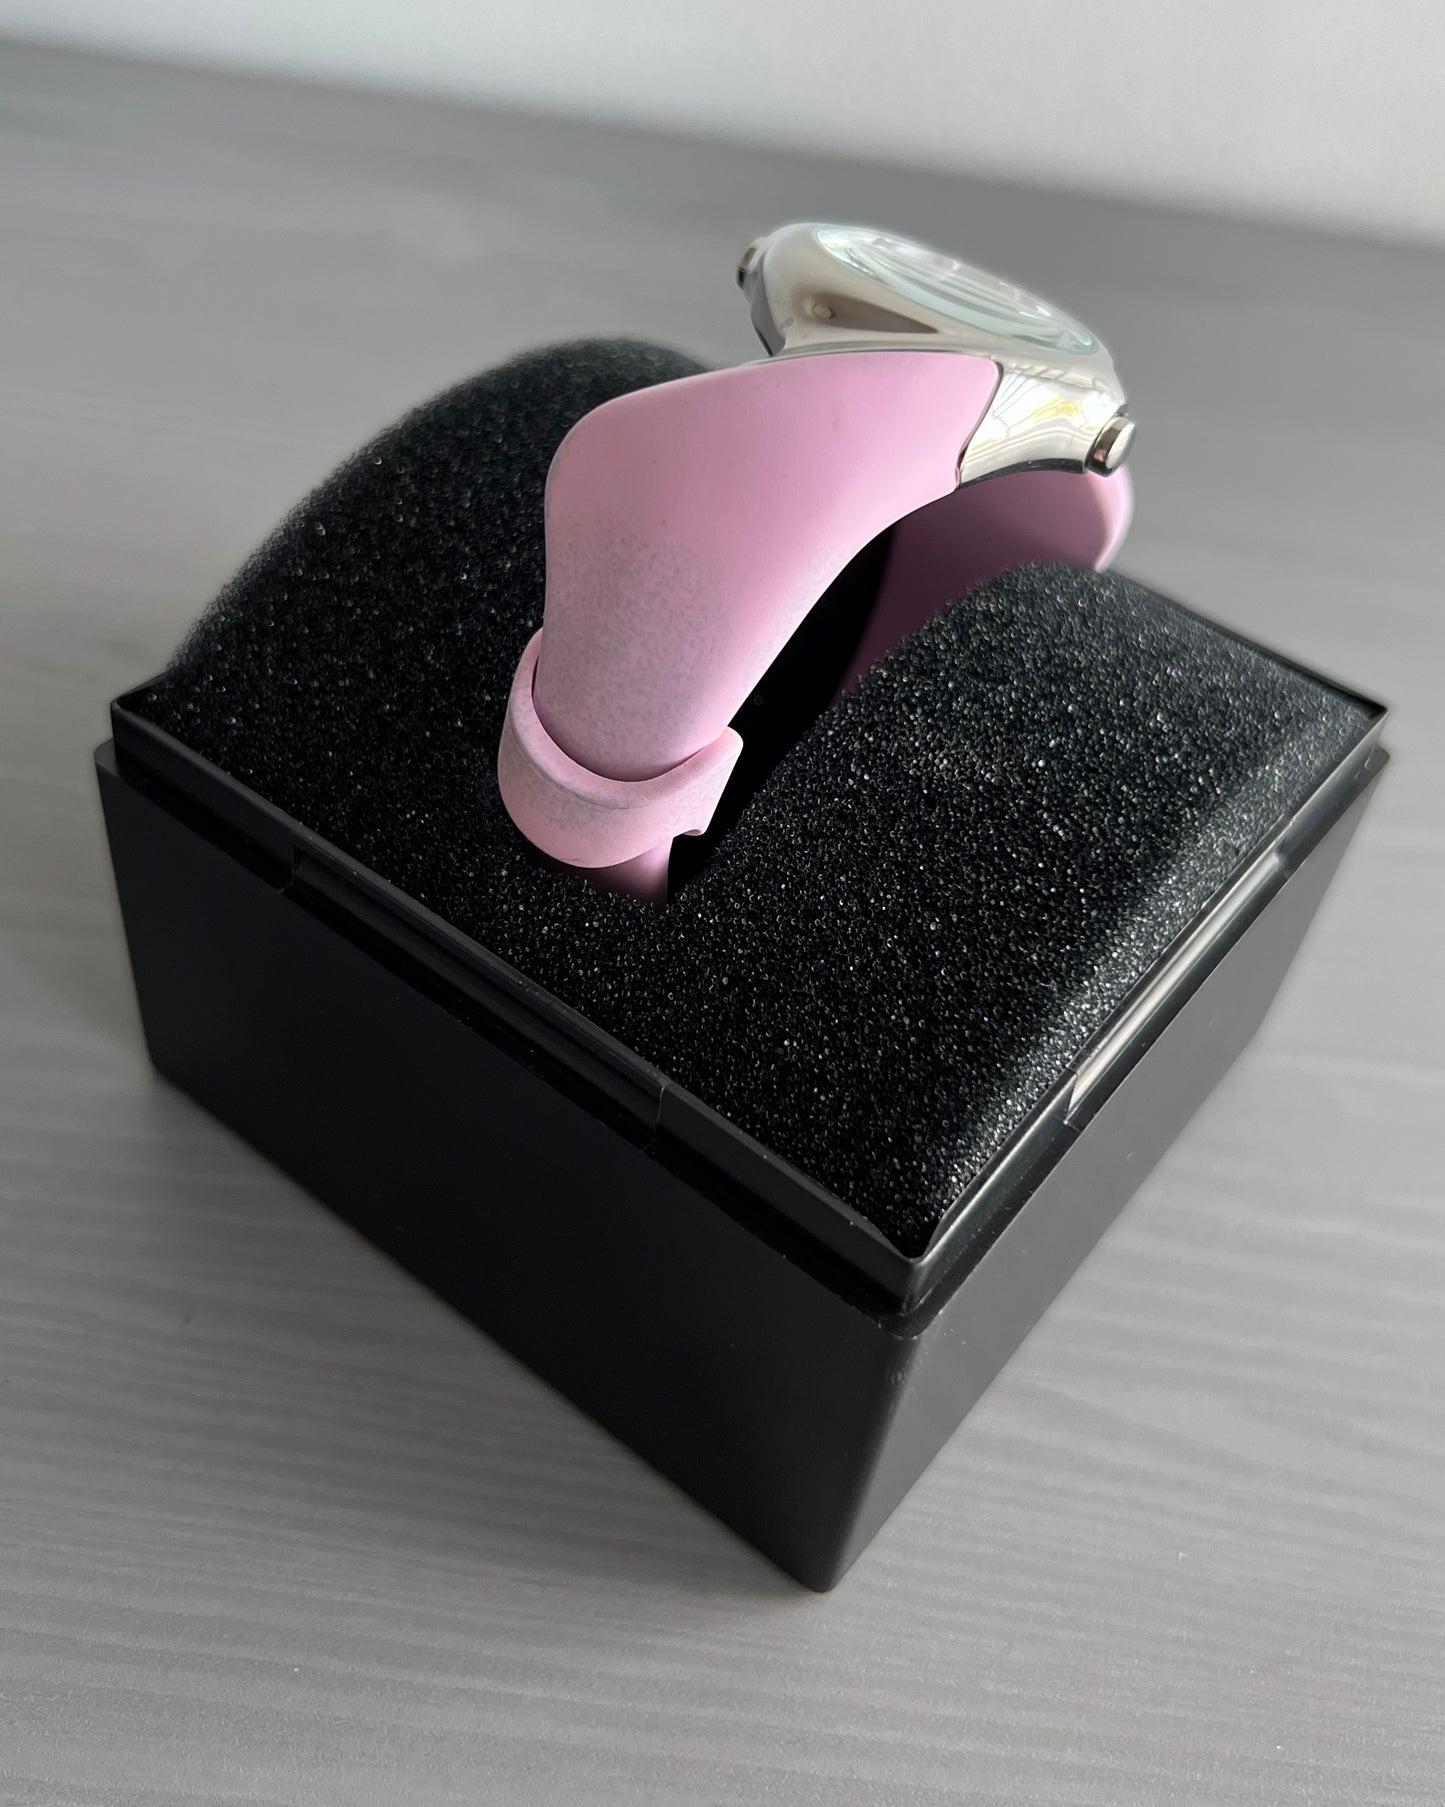 Oakley Crush 2.5 Watch in Polished Stainless Steel/Powder Pink